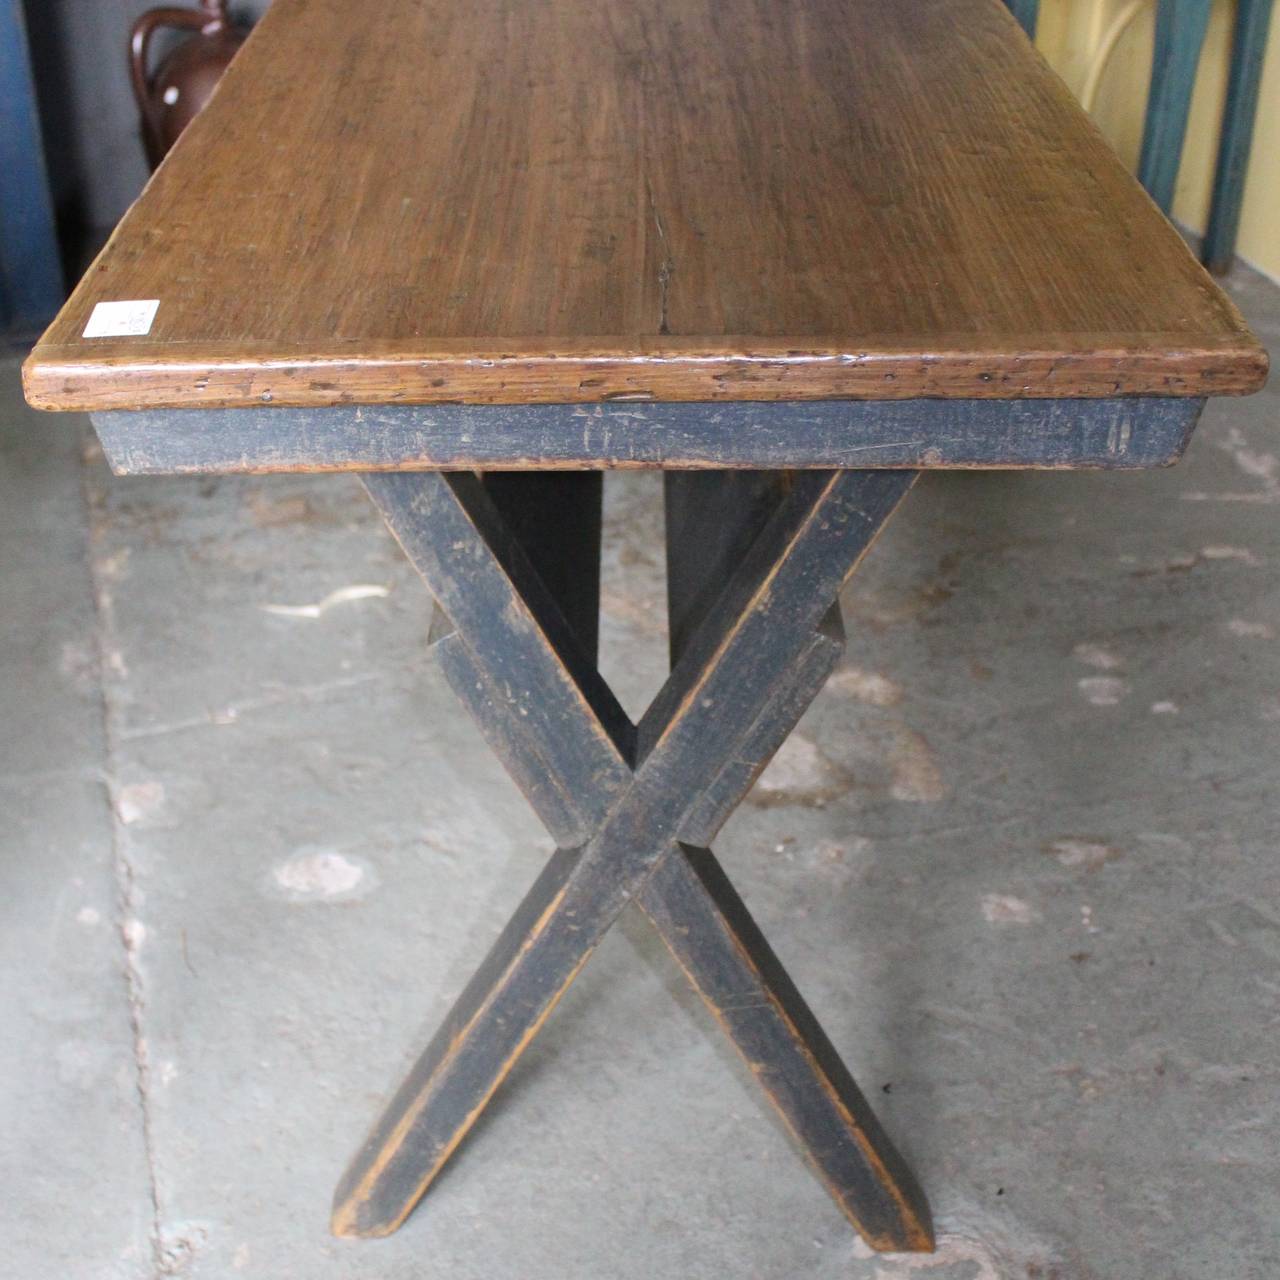 A sawbuck table from Quebec